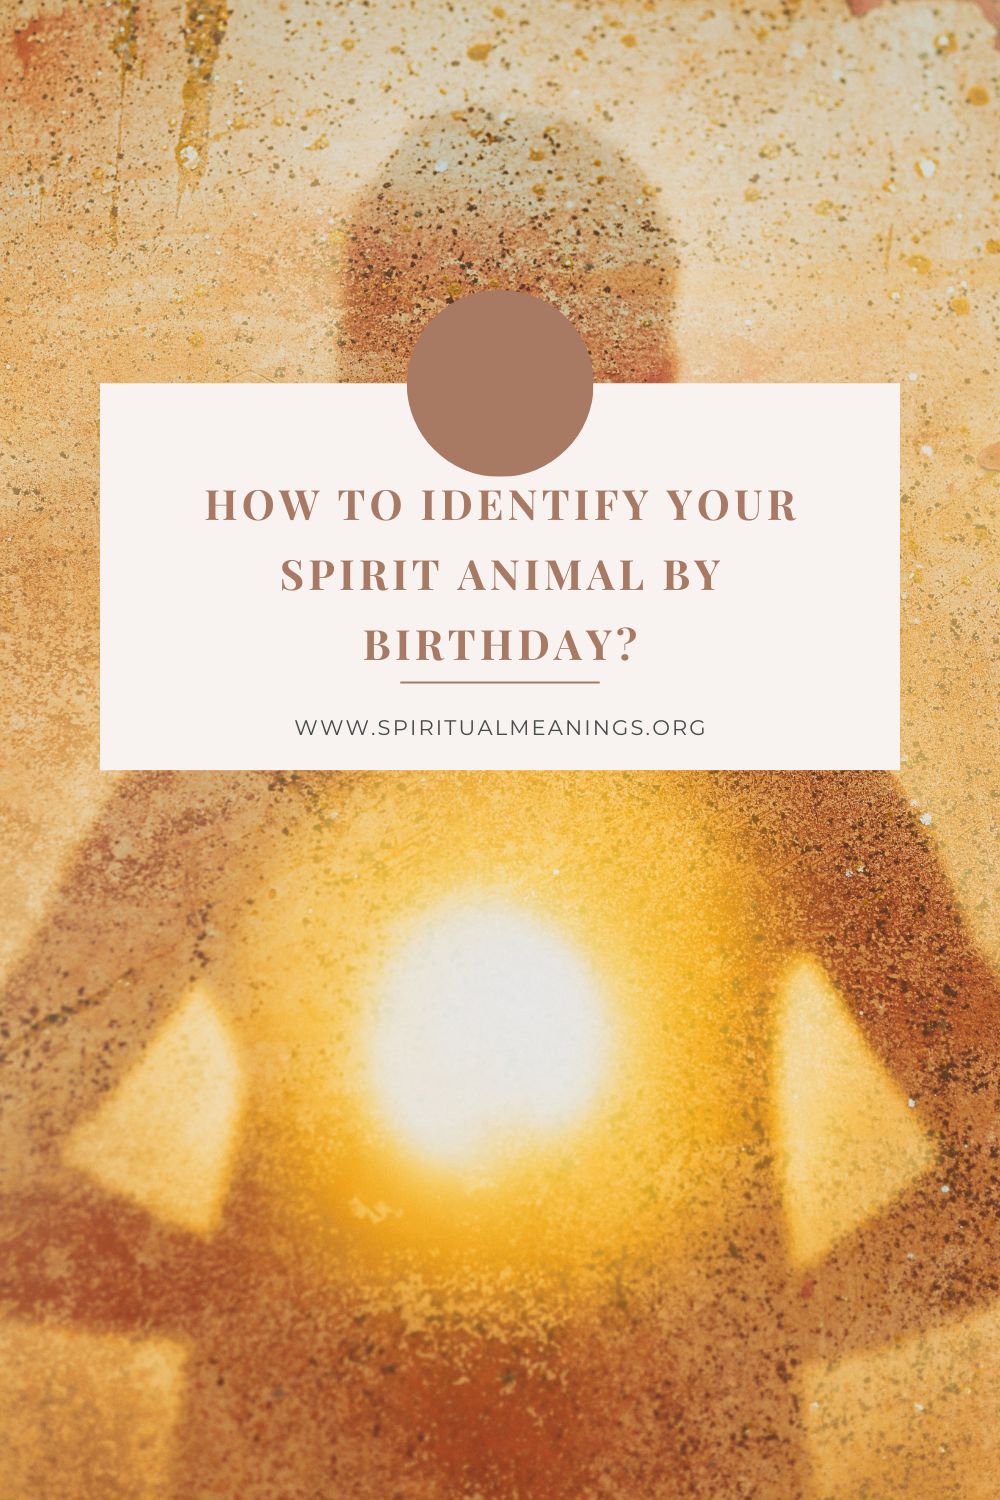 What is a Spirit Animal?